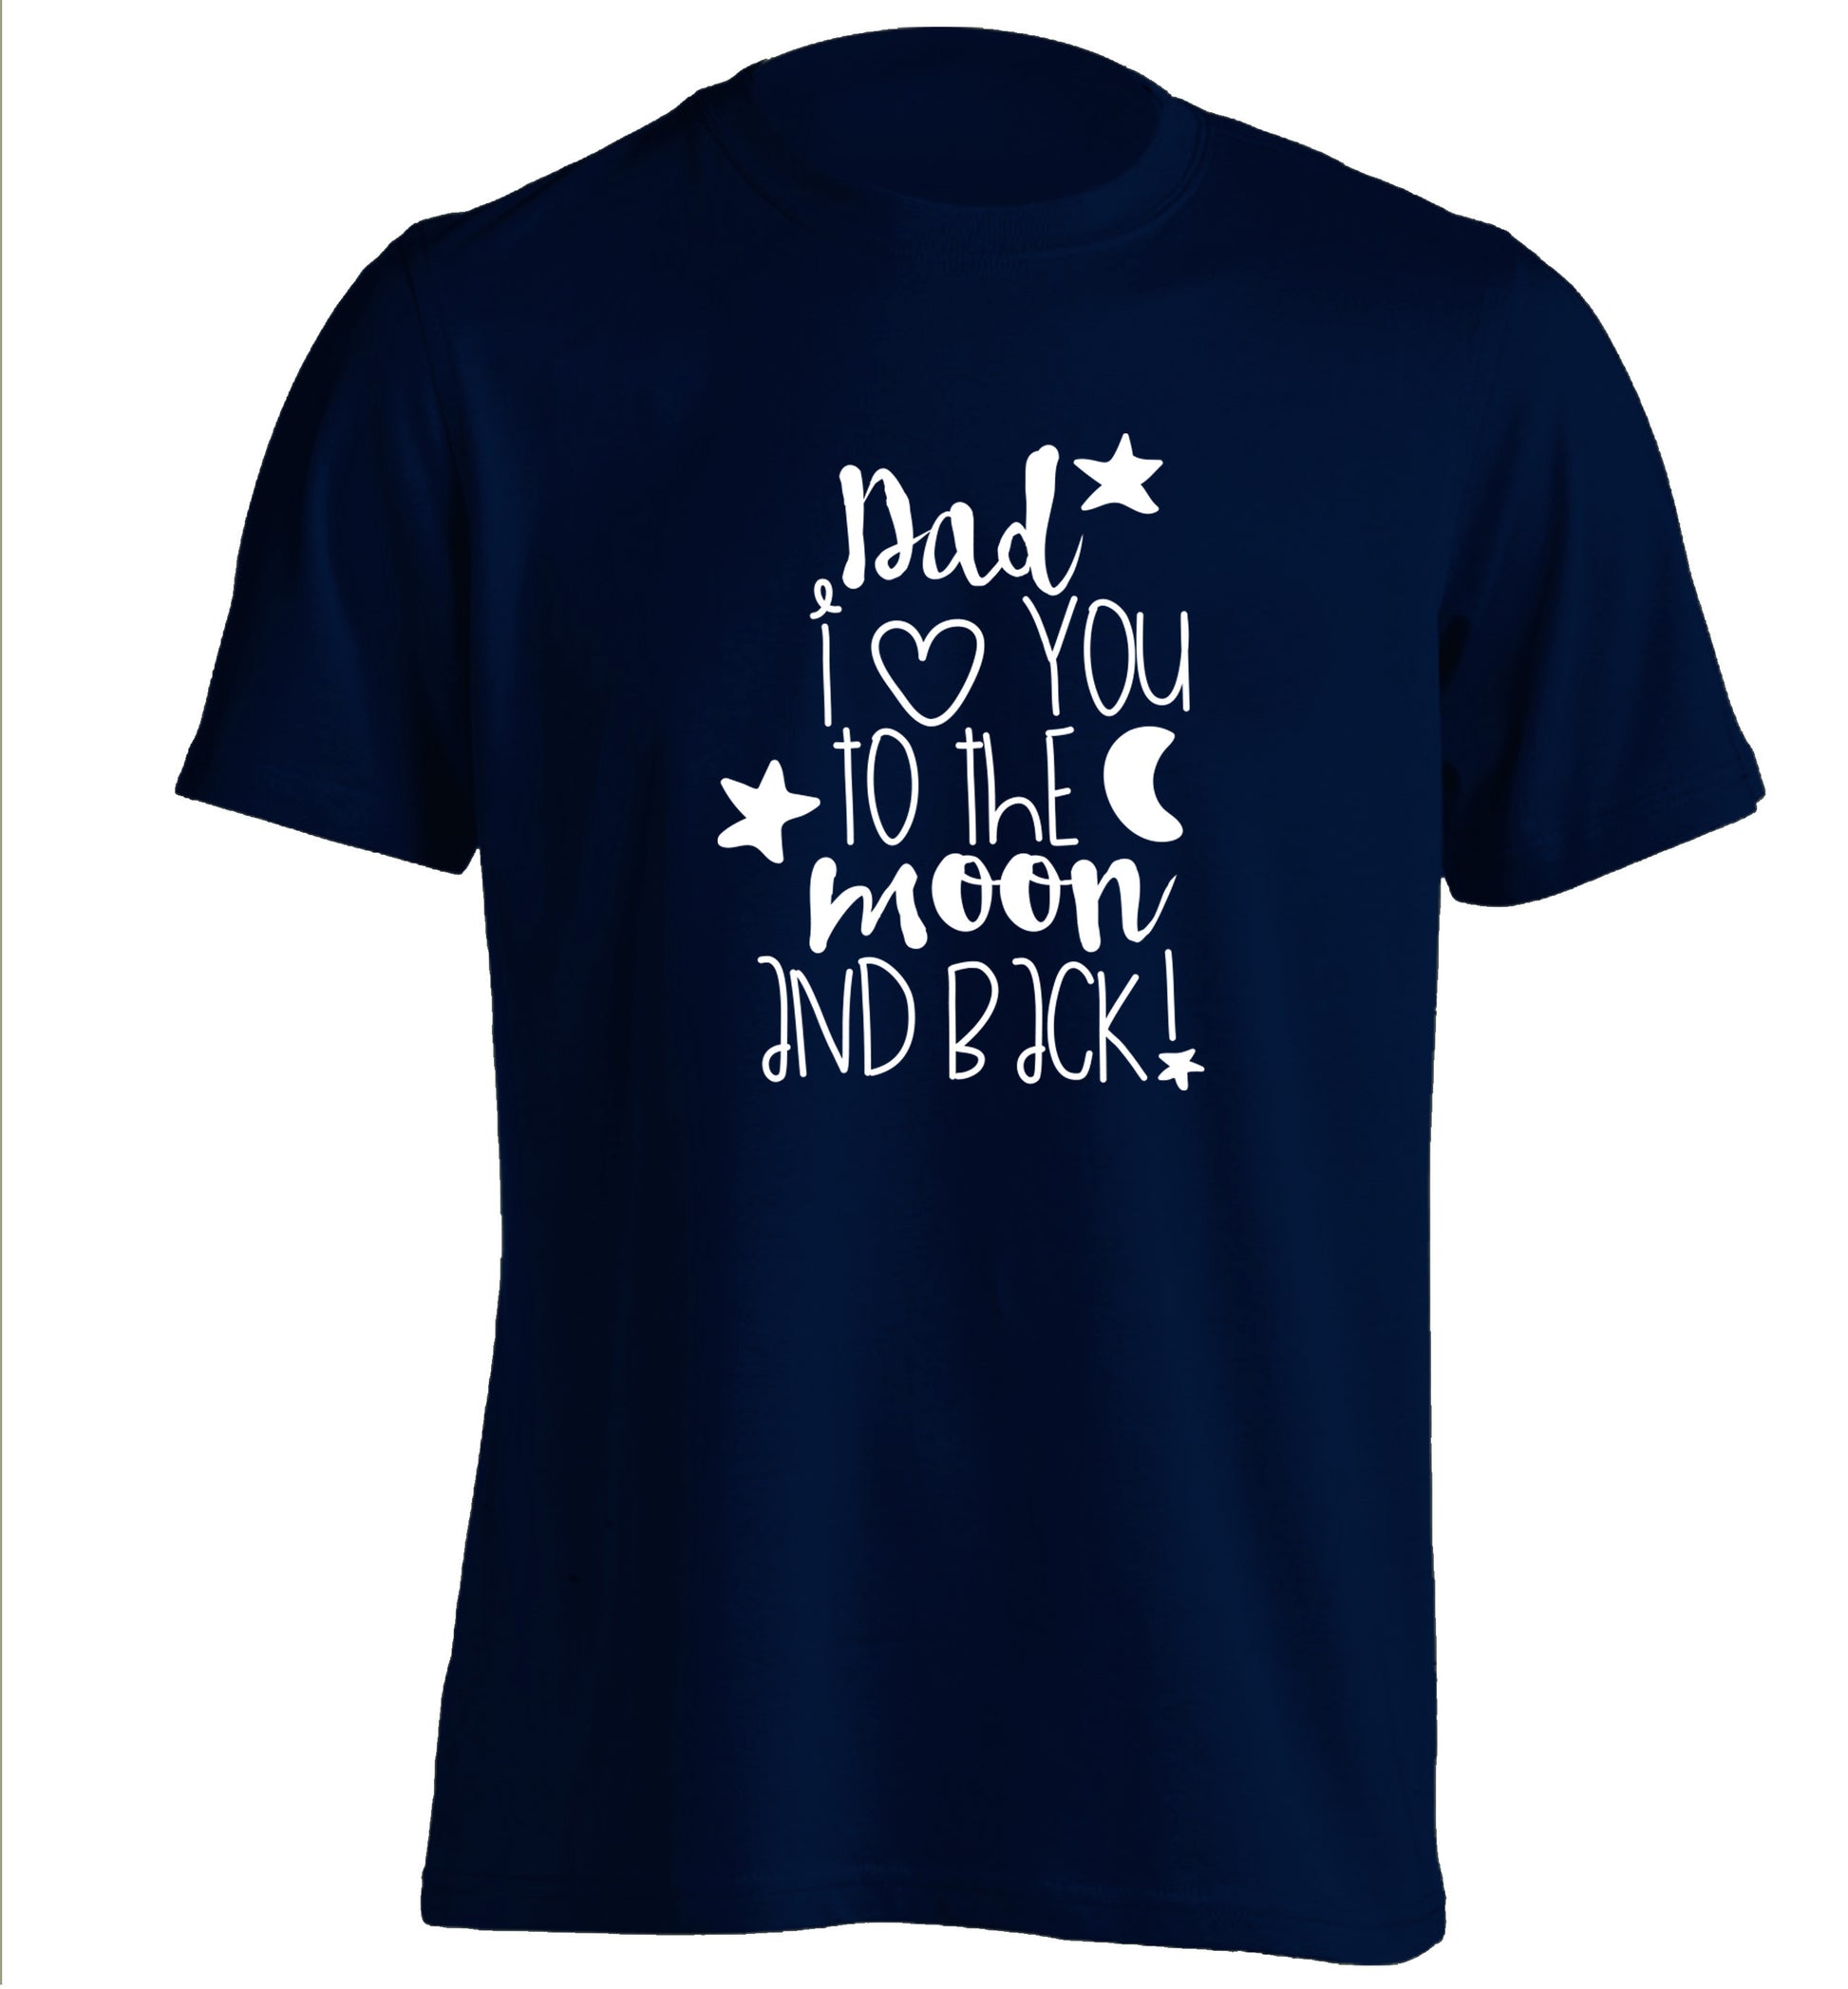 Dad I love you to the moon and back adults unisex navy Tshirt 2XL